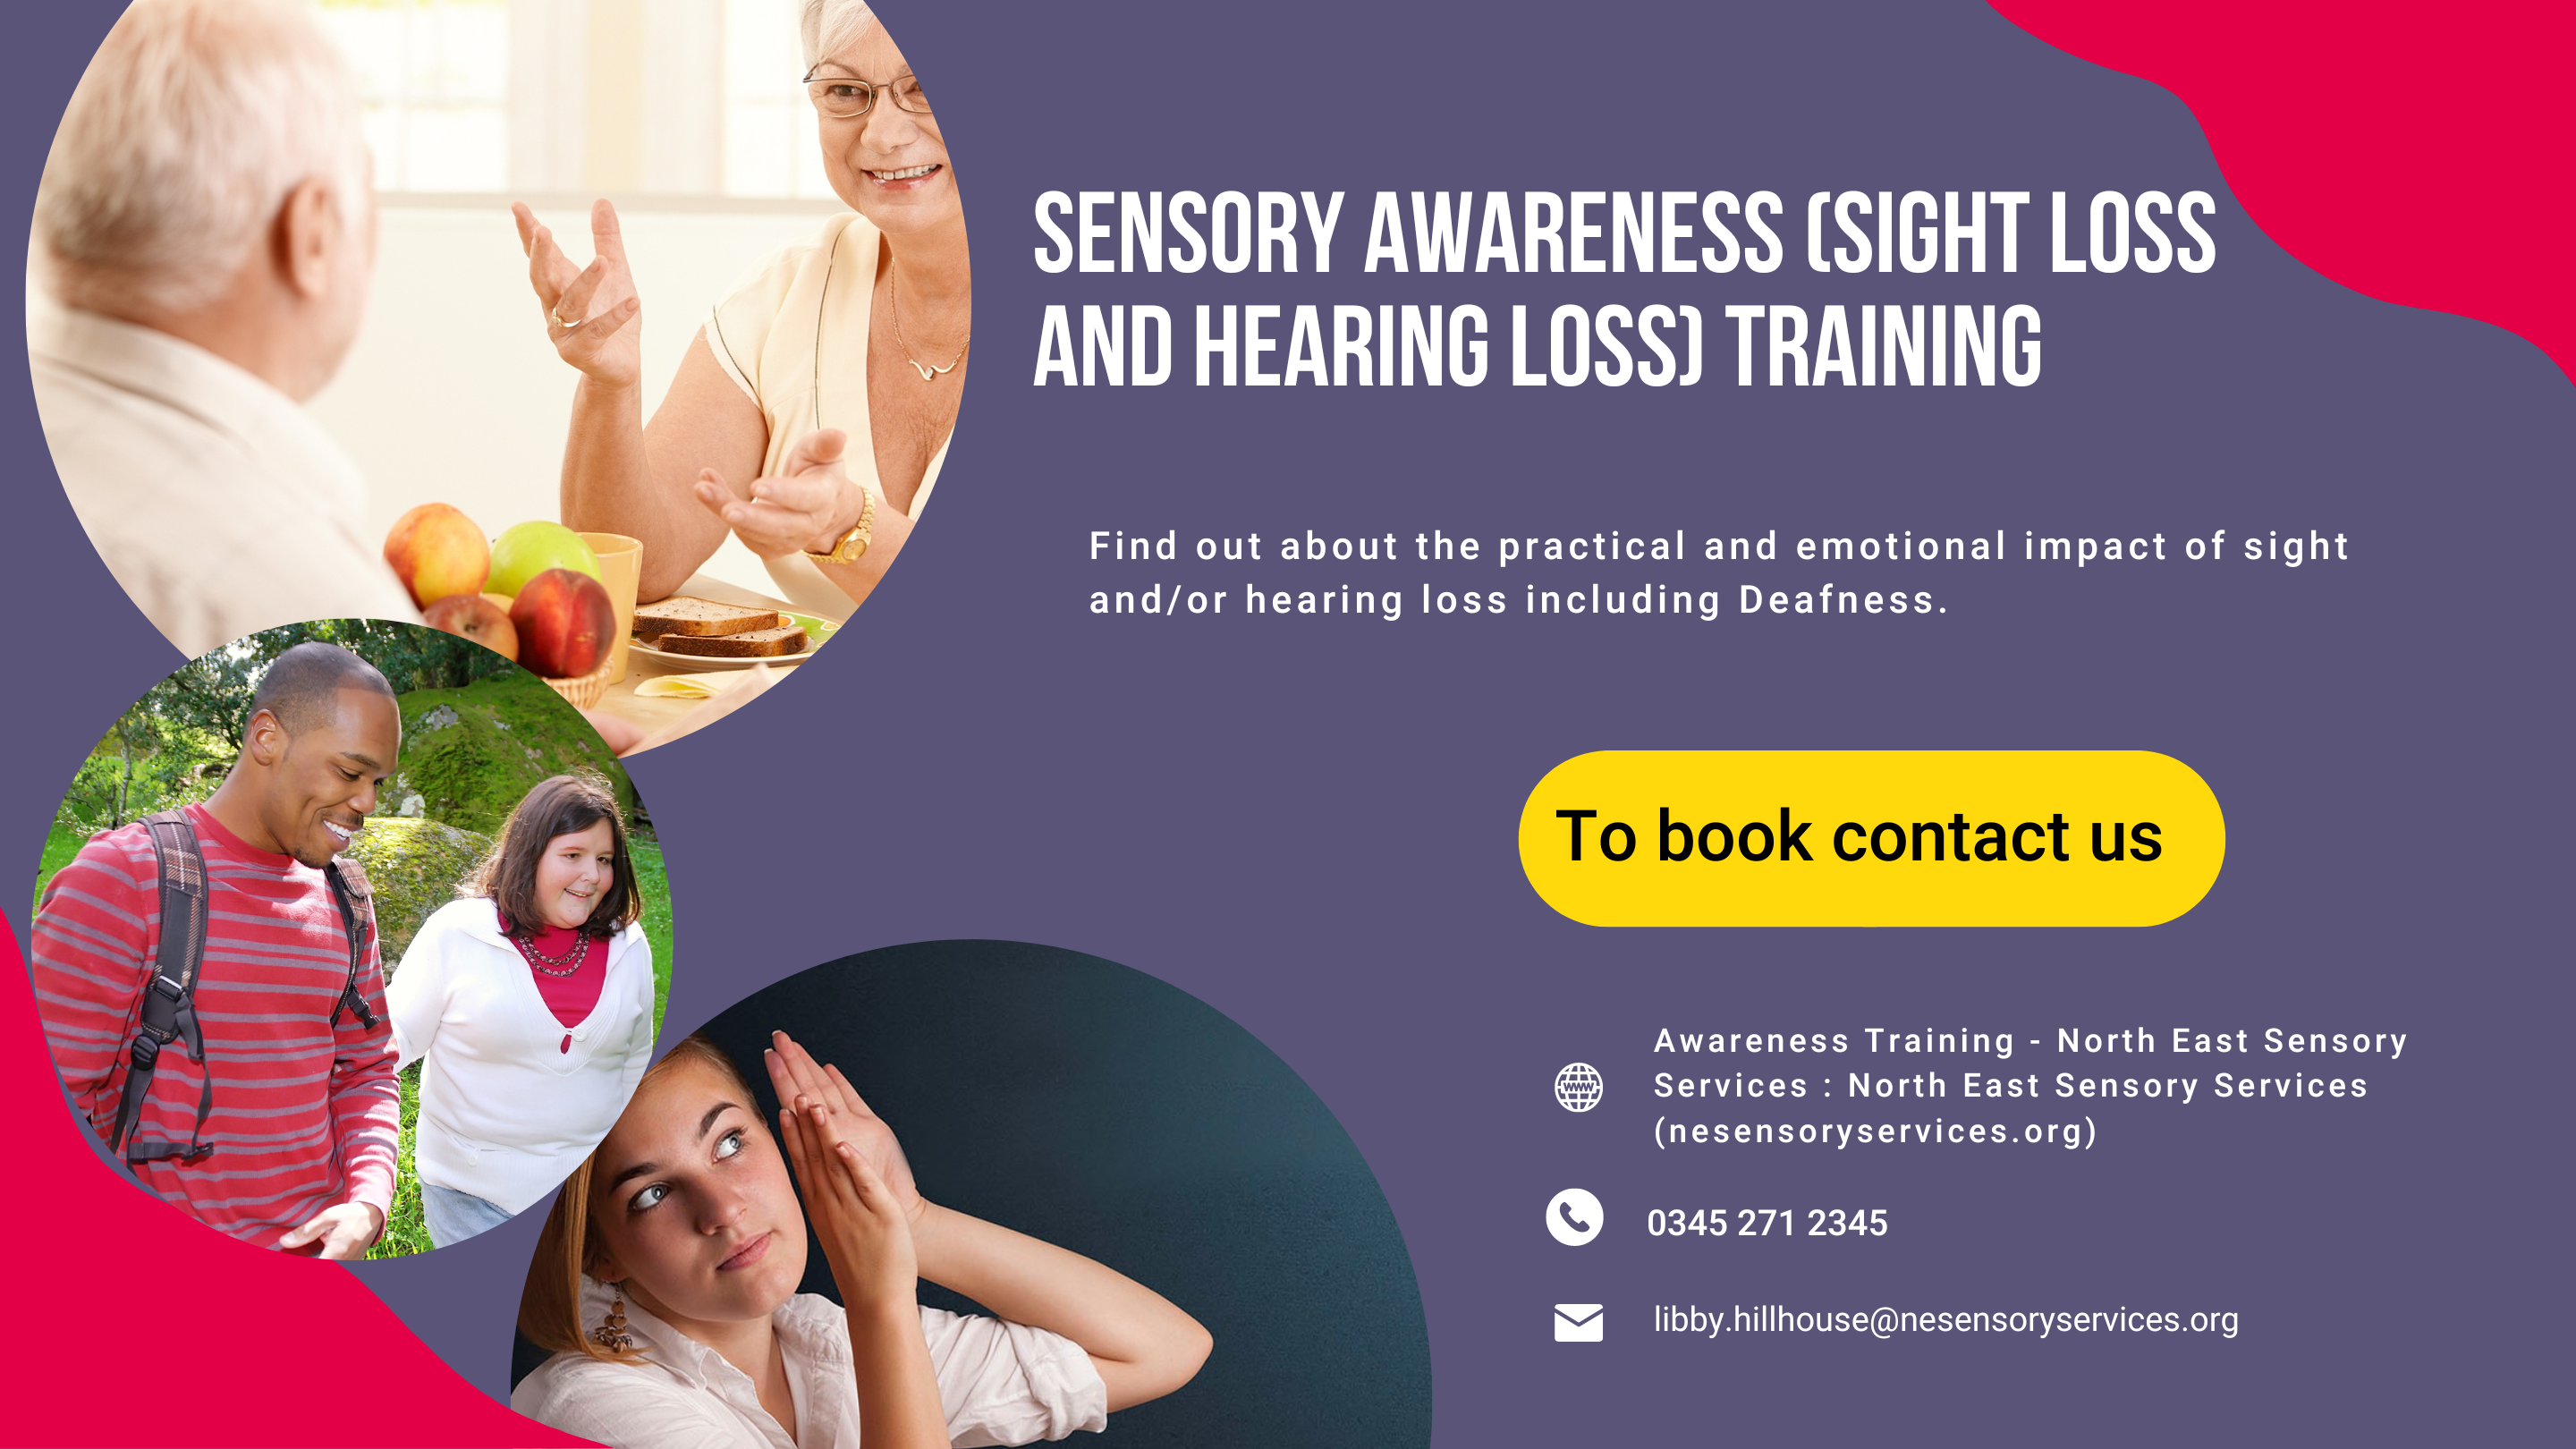 Sensory Awareness Training (sight loss and hearing loss awareness) find out about the practical and emotional impact of sight and/or hearing loss including deafness. Contact us - visit our website, phone 0345 271 2345 or email libby.hillhouse@nesensoryservices.org